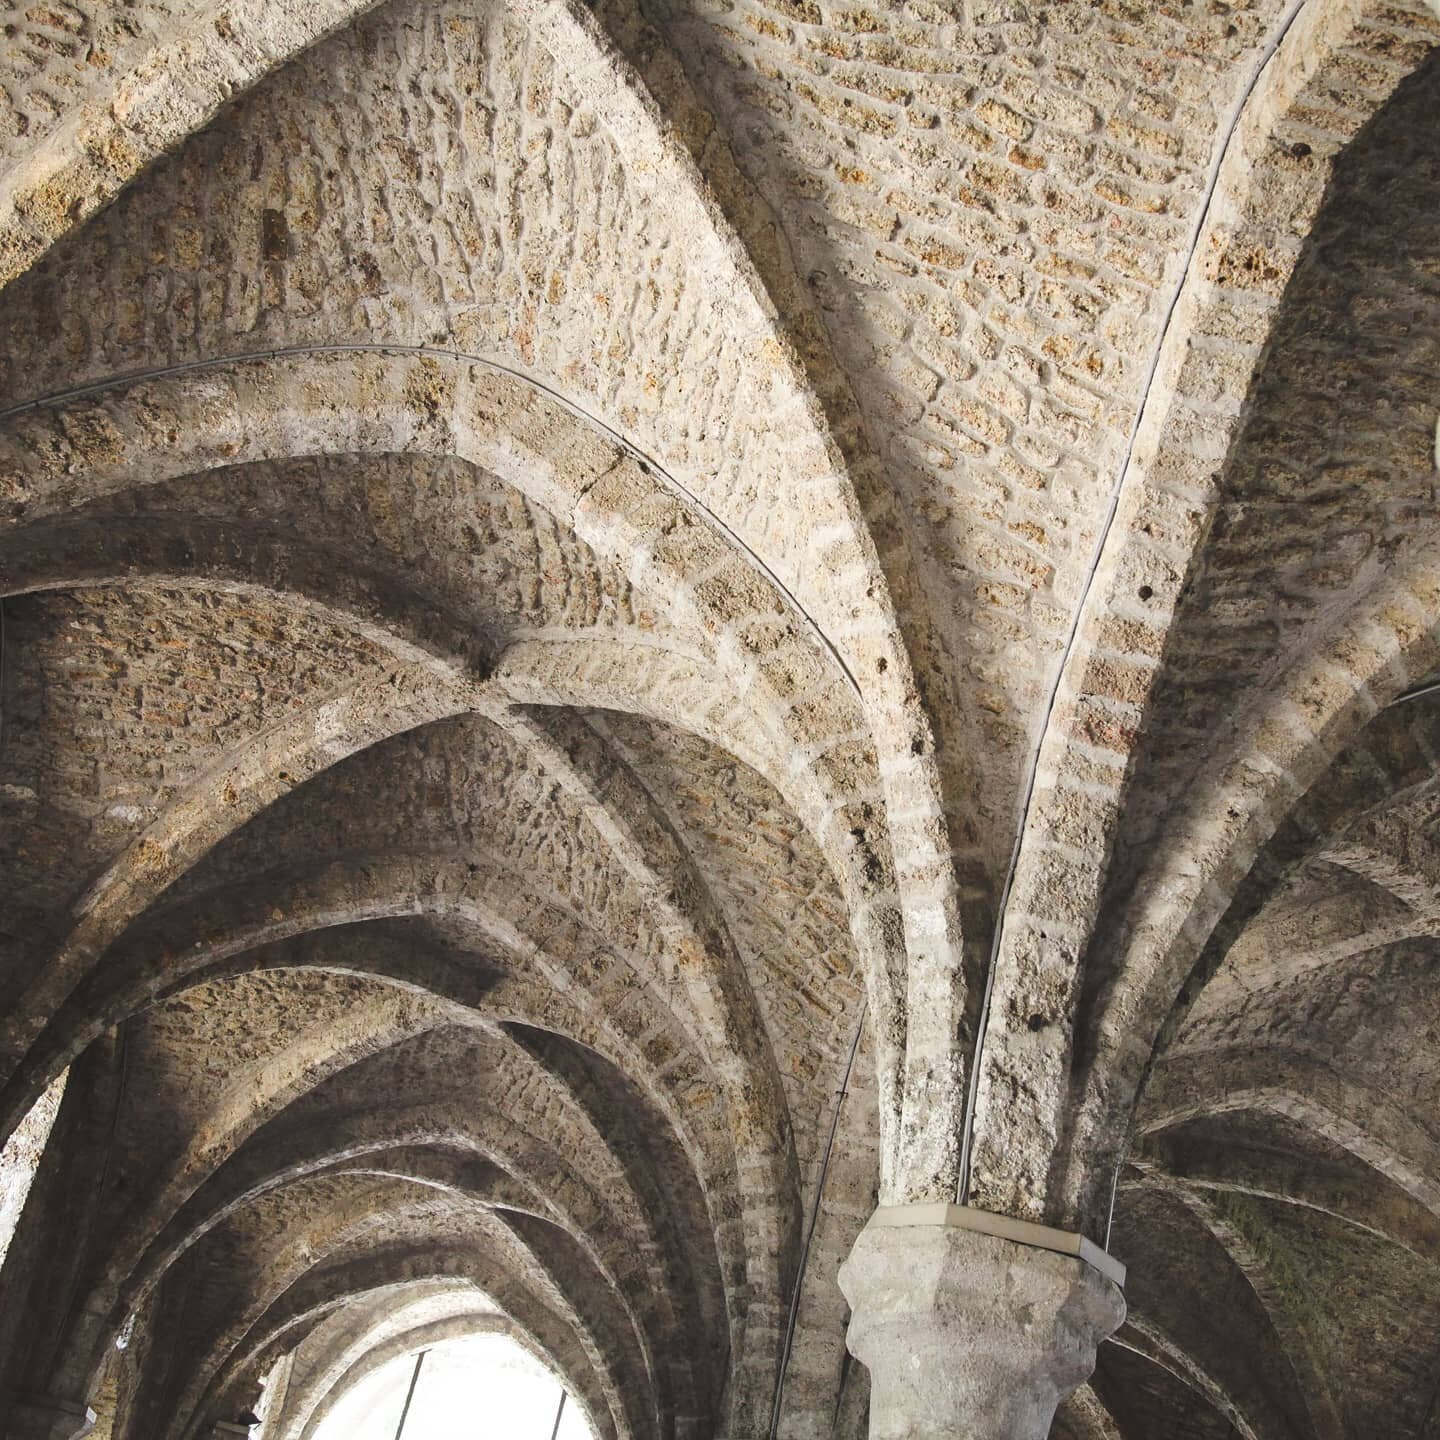 Let's try this again.. 

The Abbey Vaux de Cernay is absolutely stunning and perfect for photos. We couldn't get enough, even if the focus is off 😚